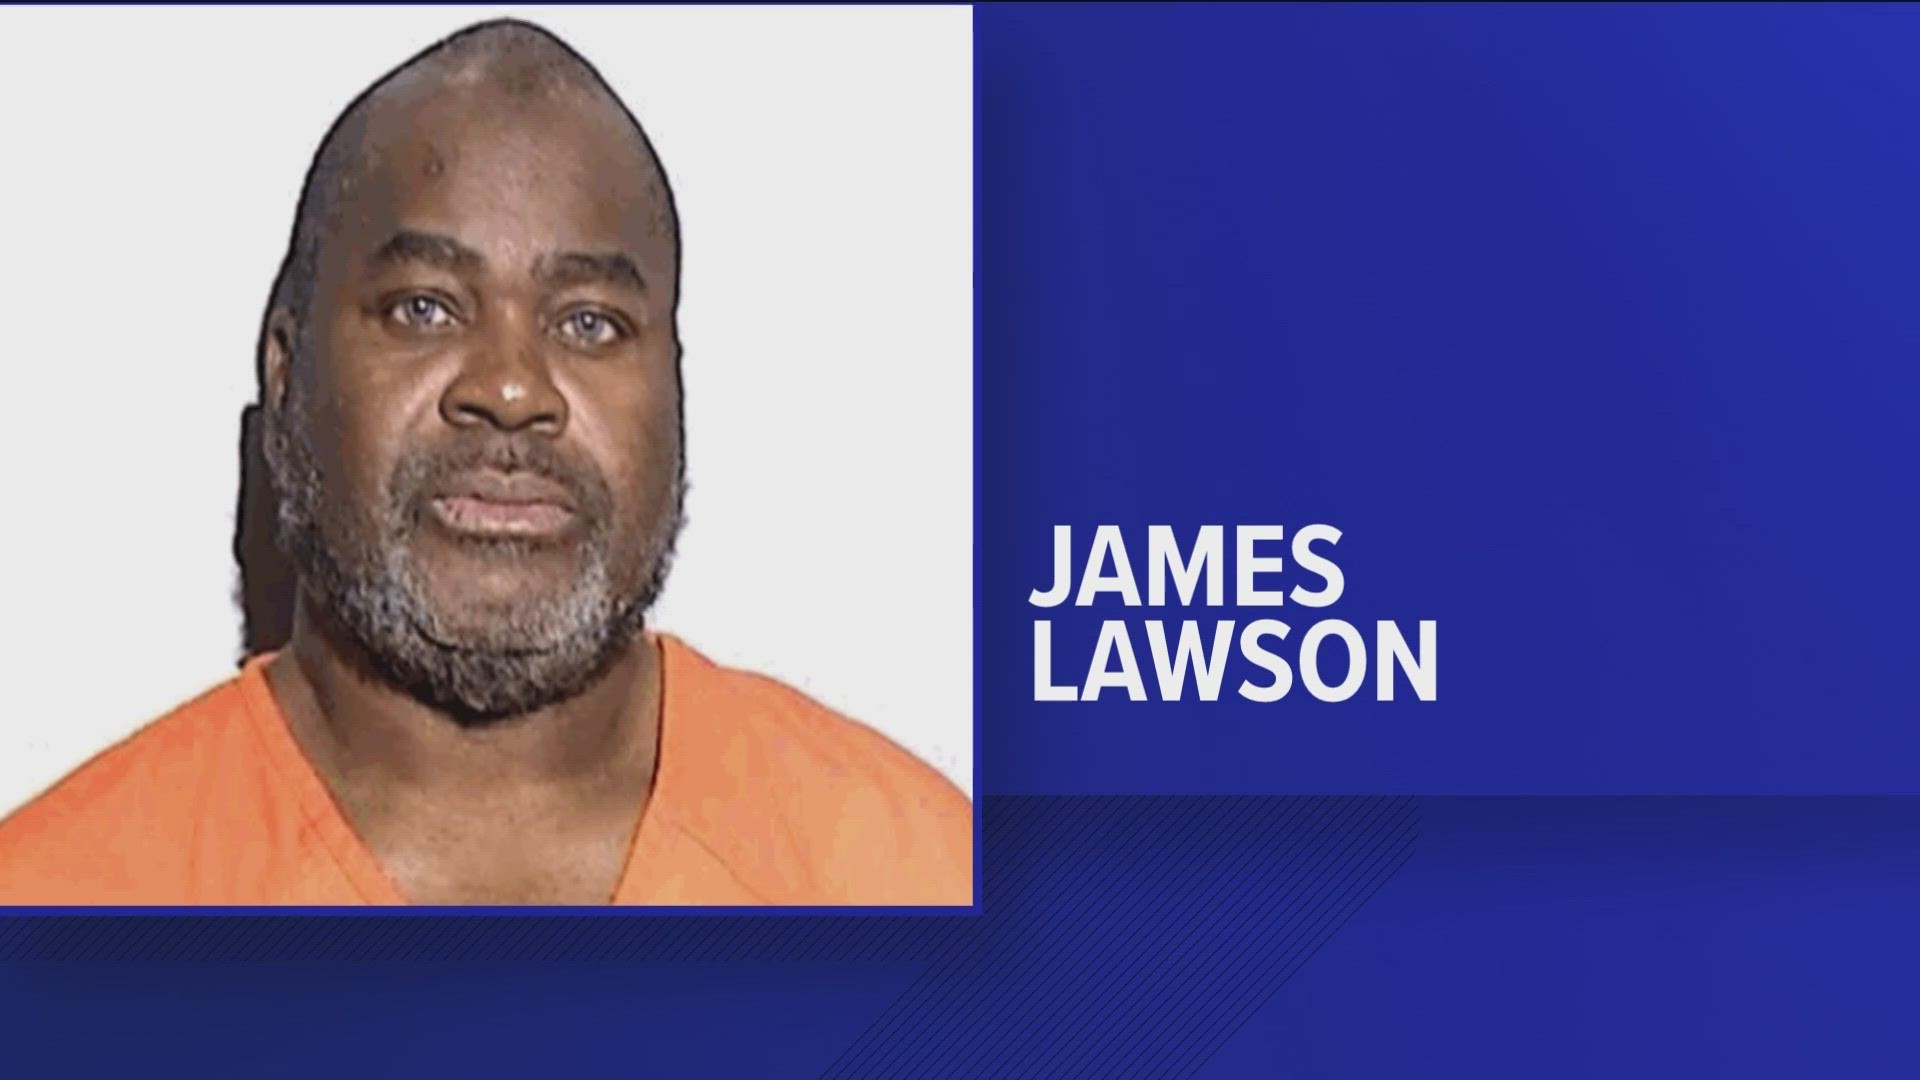 James Lawson allegedly engaged in child sex trafficking, using his Toledo ministry's food pantry as a way to coerce and exploit minors, according to court documents.